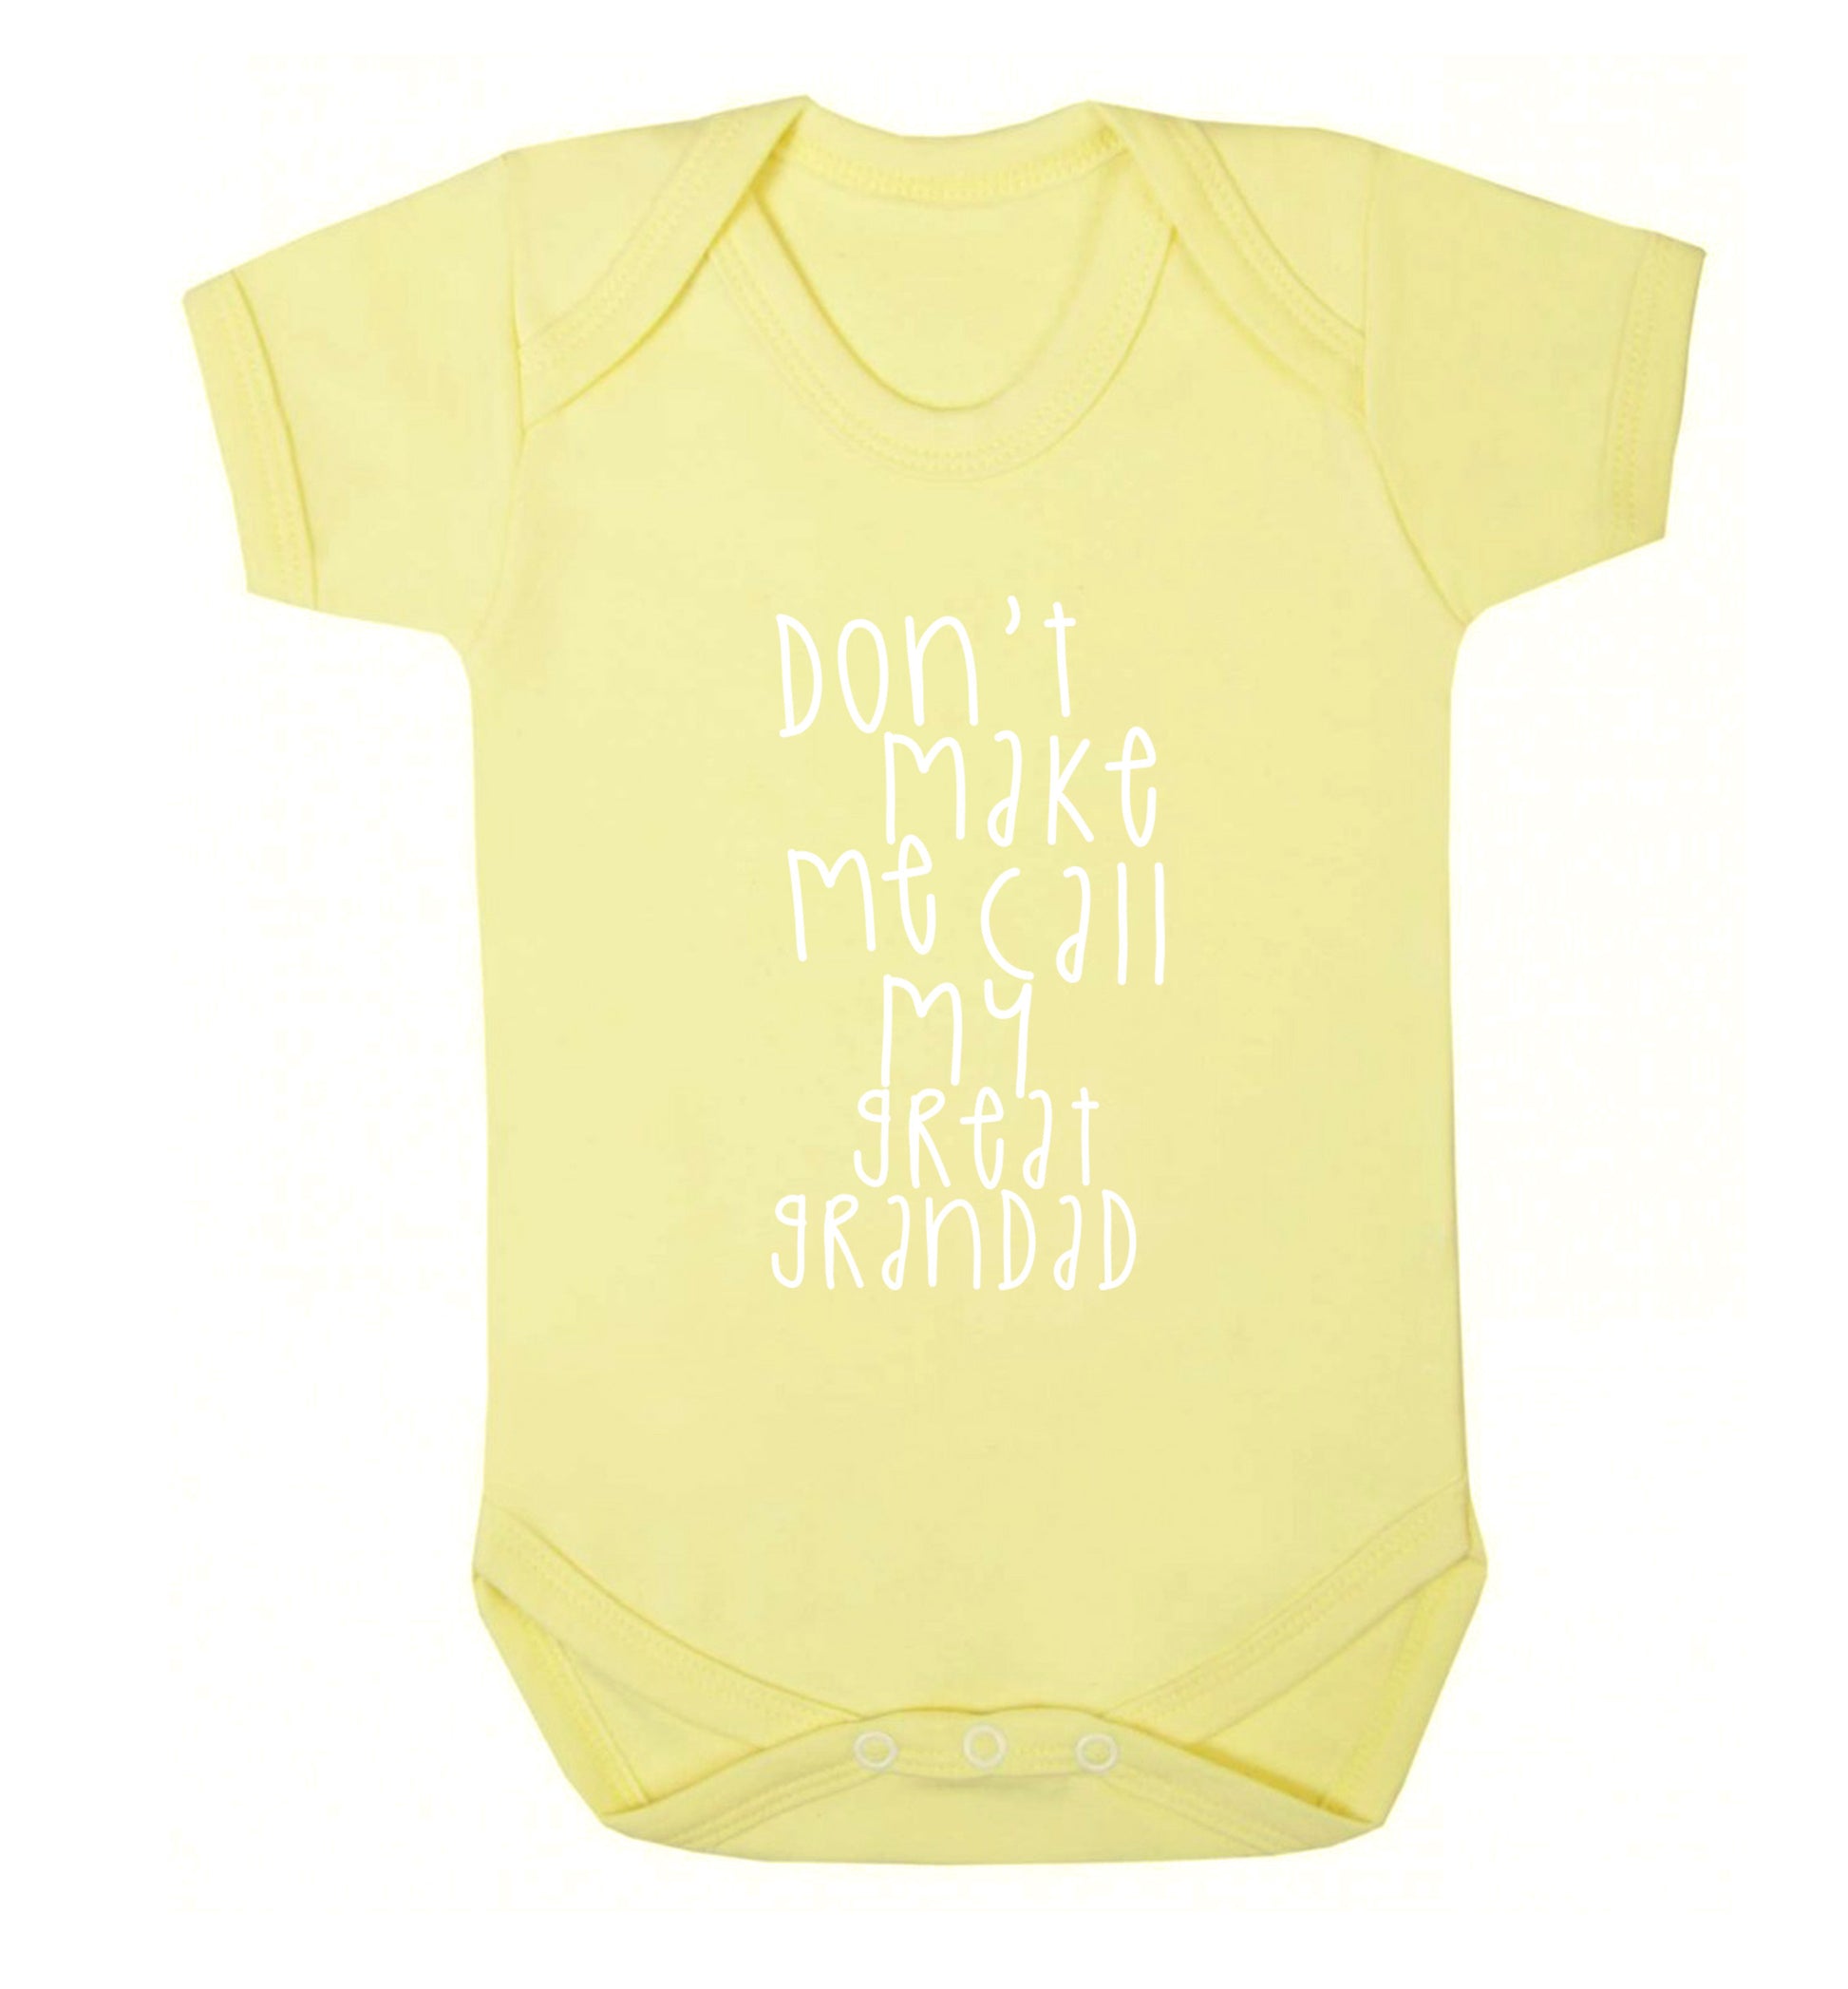 Don't make me call my great grandad Baby Vest pale yellow 18-24 months